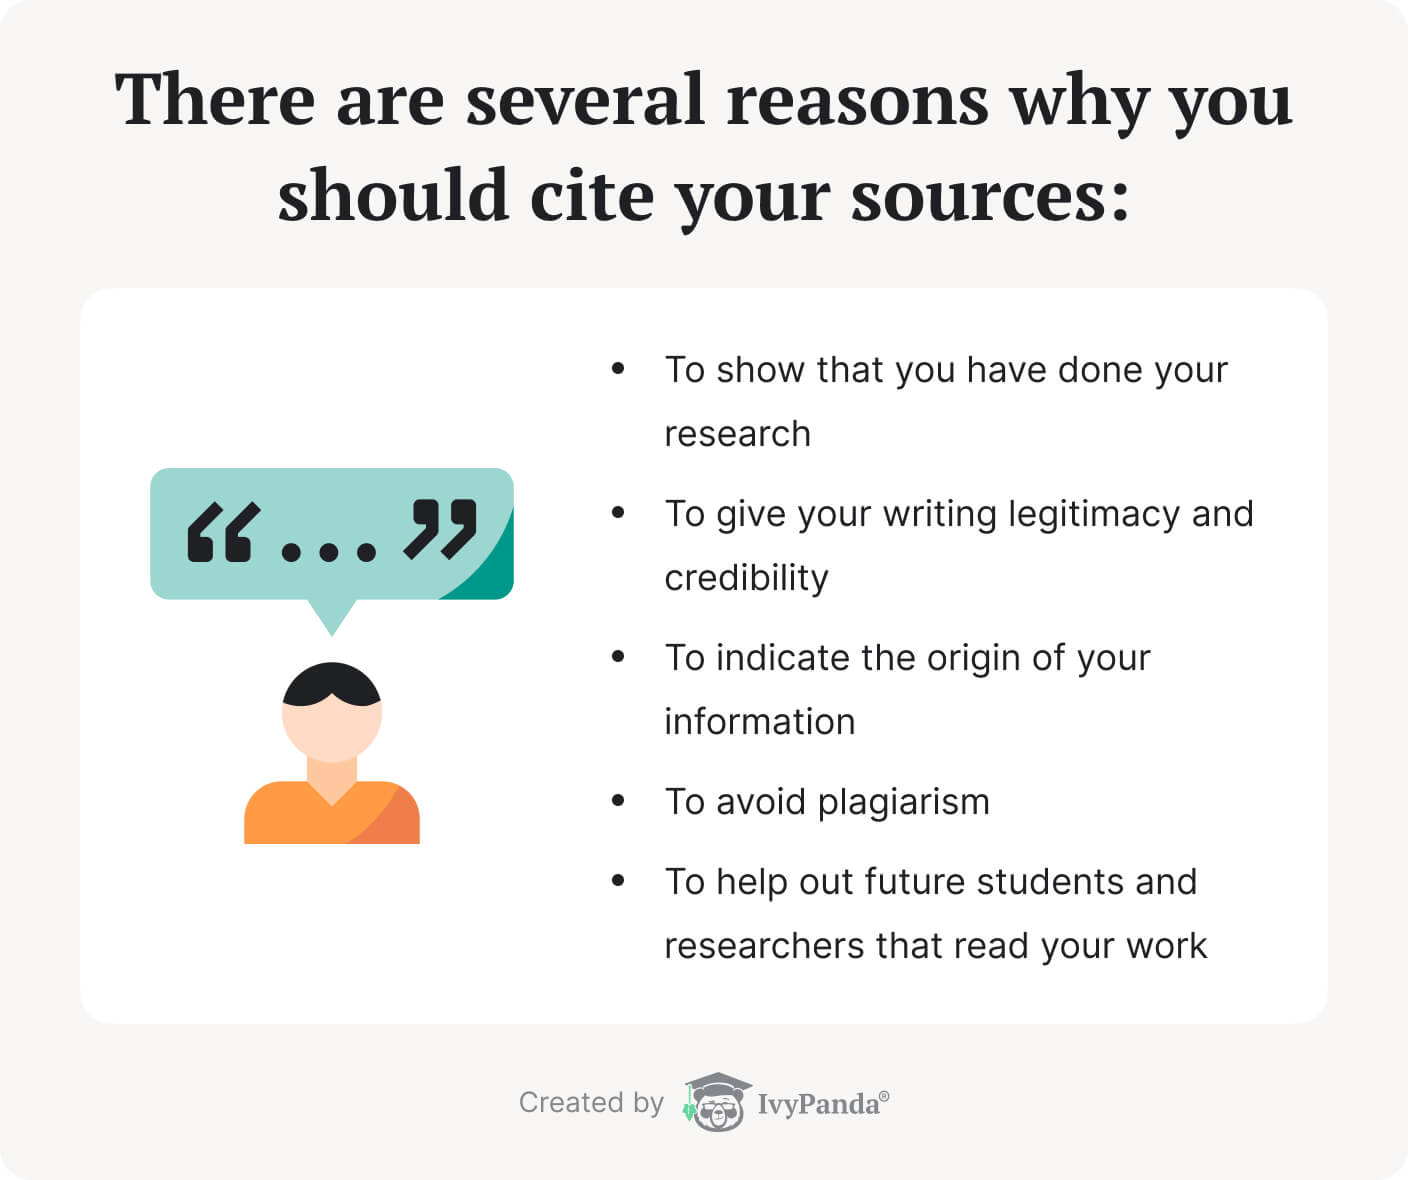 Reasons to cite the sources.